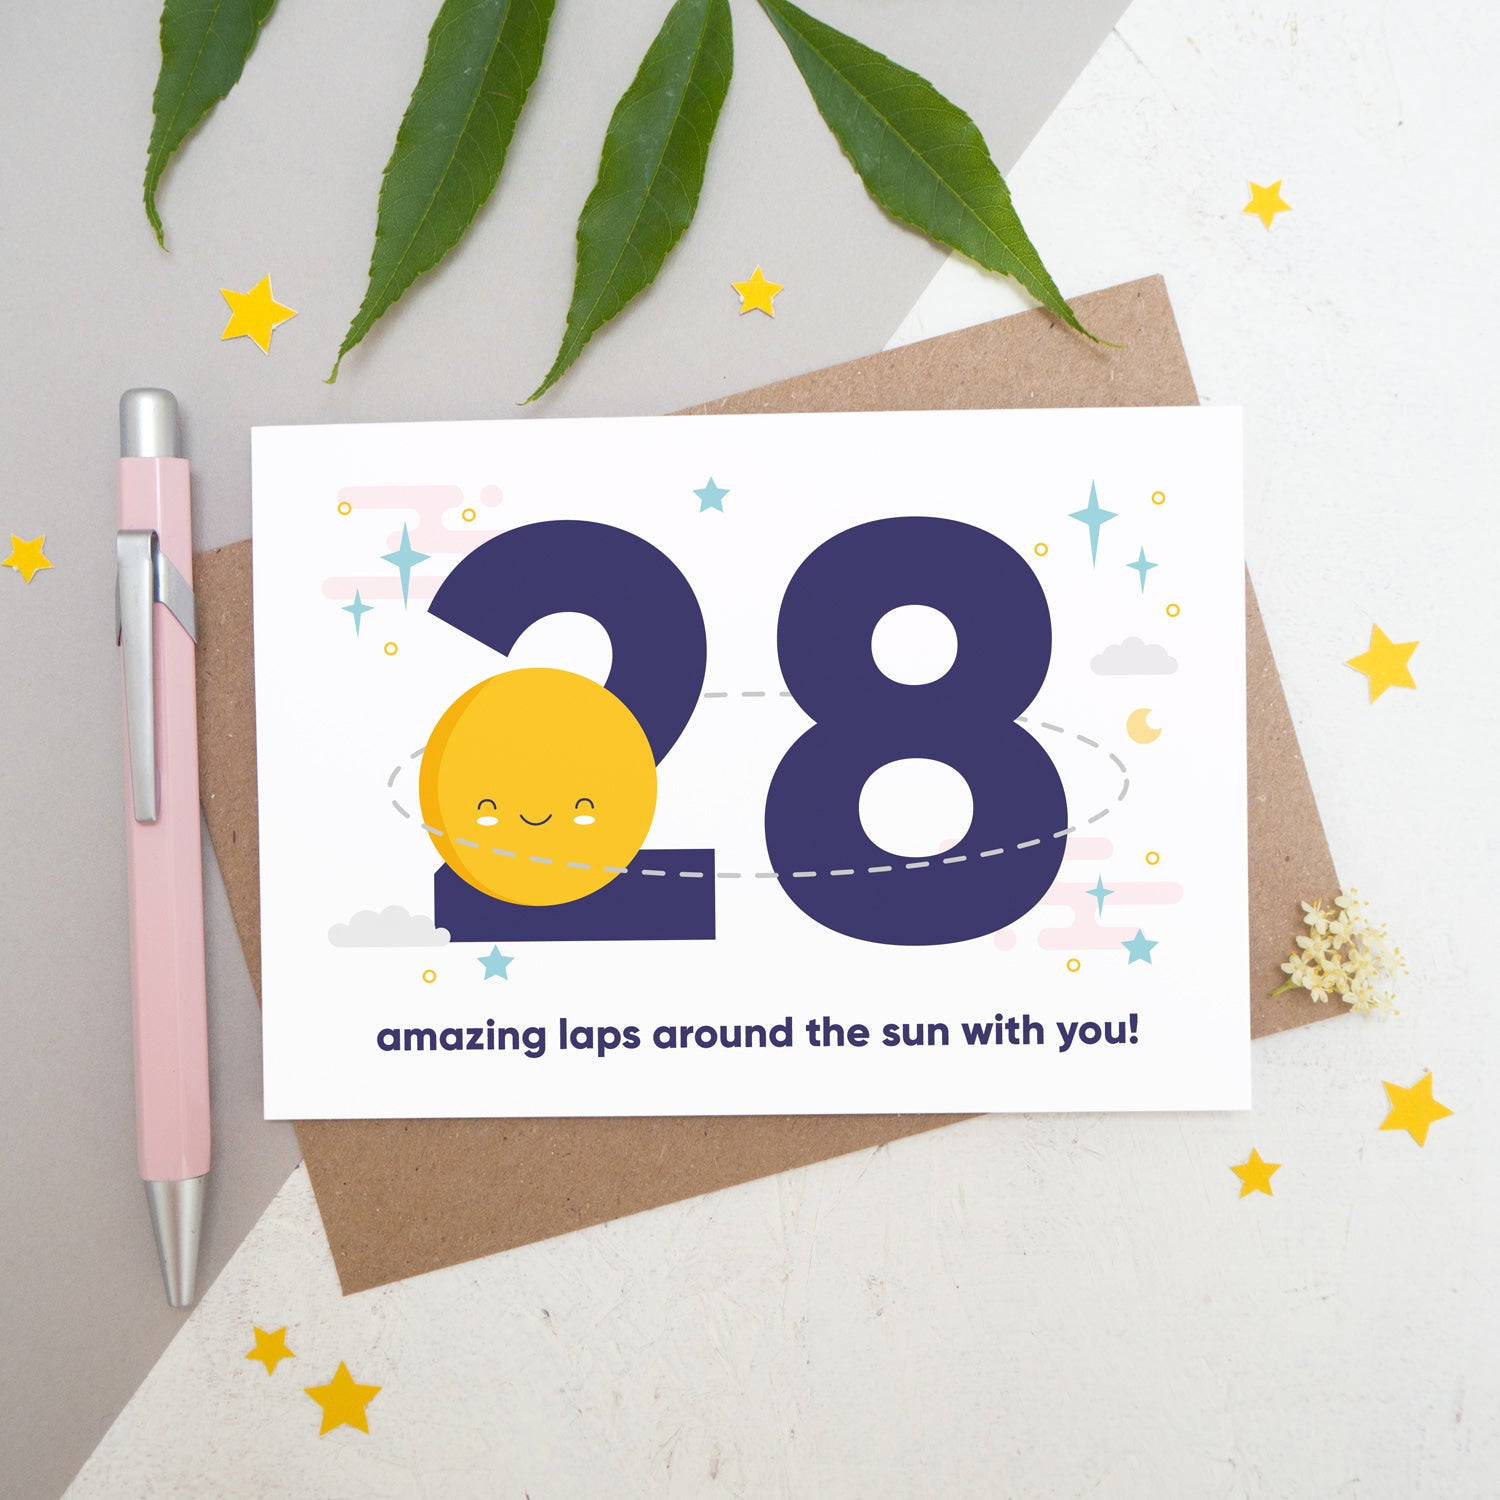 Laps around the sun anniversary card featuring a sun orbiting the number 28 surrounded by stars. Flat lay image shot on a white and grey background with some foliage, yellow stars and a pink pen.